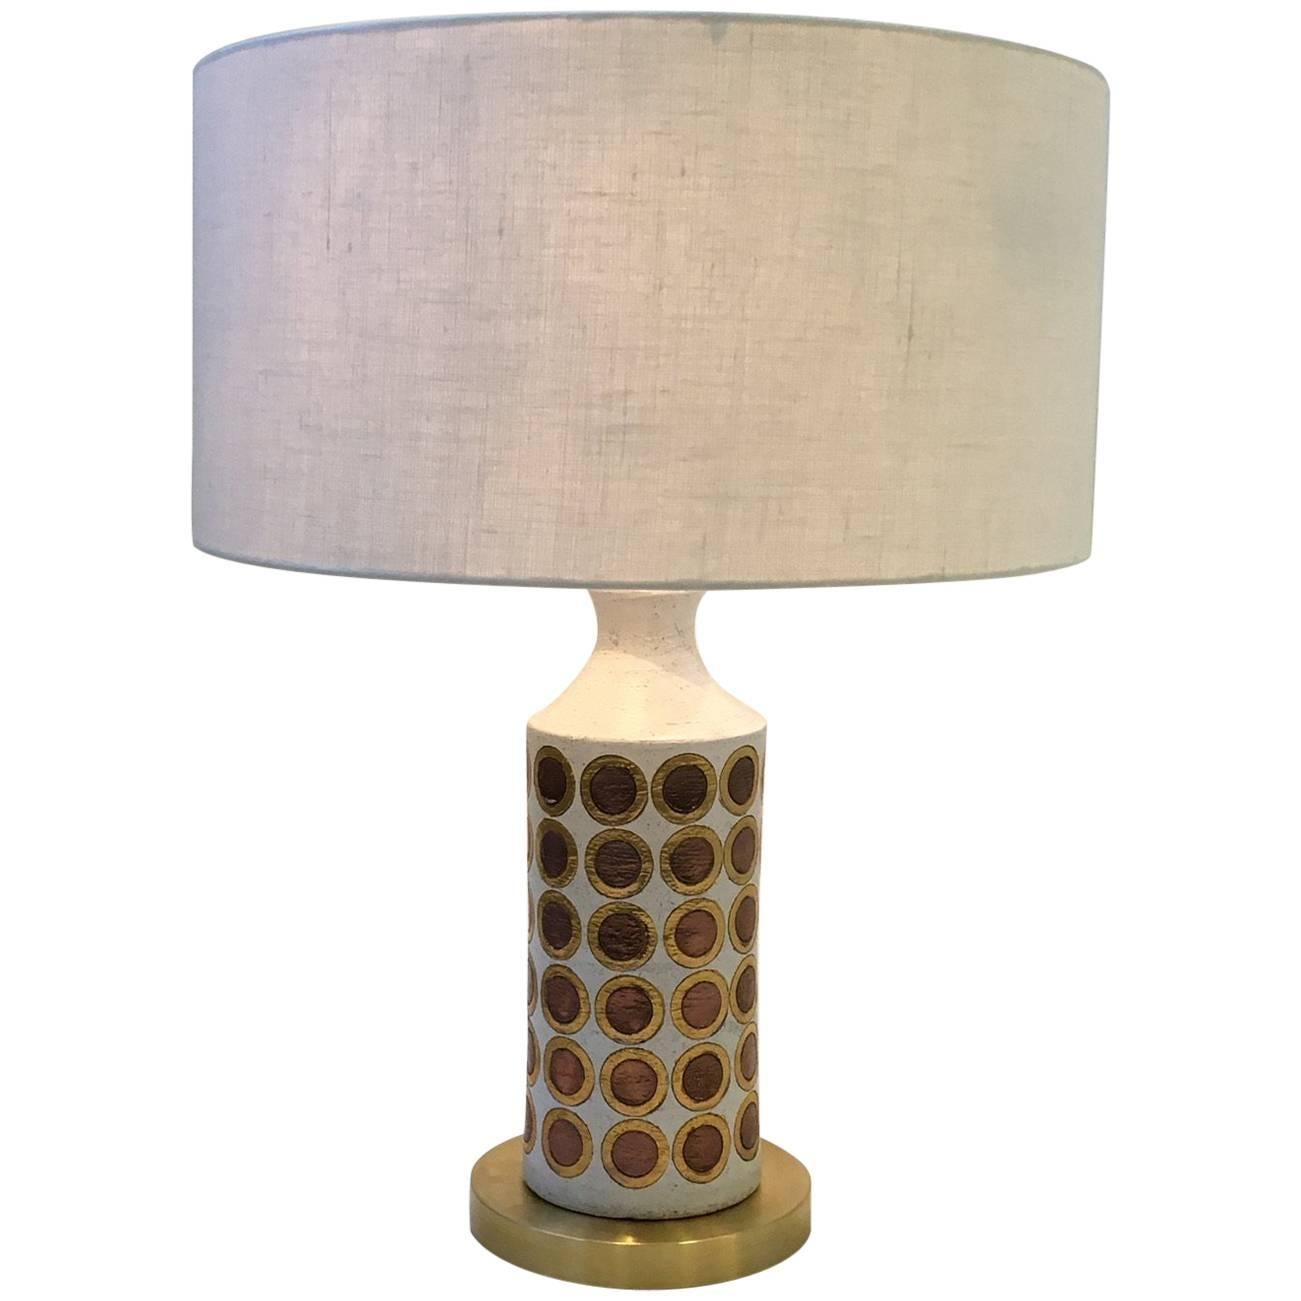 Italian Ceramic and Brass Table Lamp by Bitossi